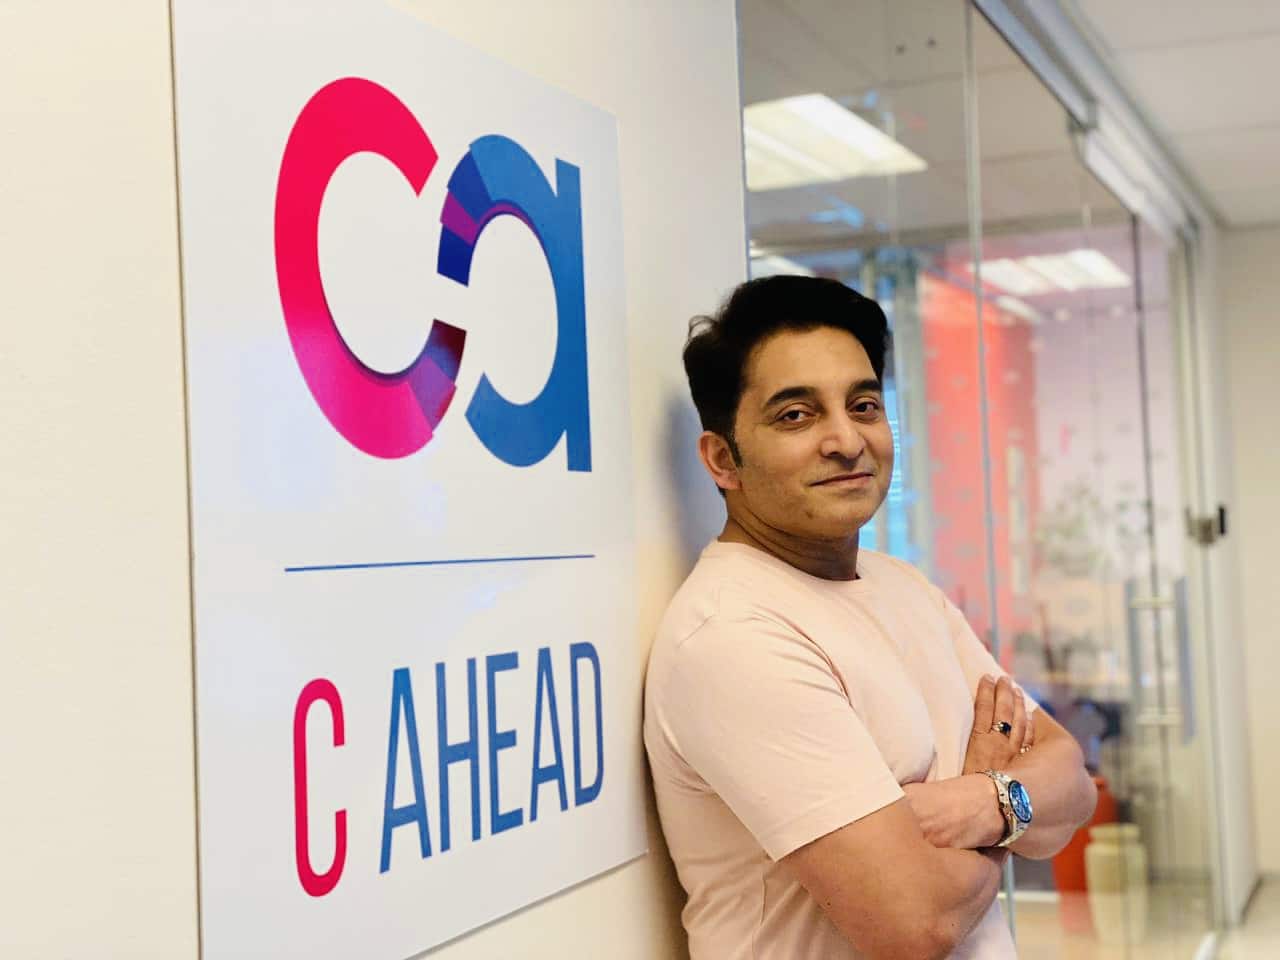 Success Story: Meet Sandeep Sekhar; Read About His Phenomenal Rise from IT Professional to Global CEO of C Ahead Technologies